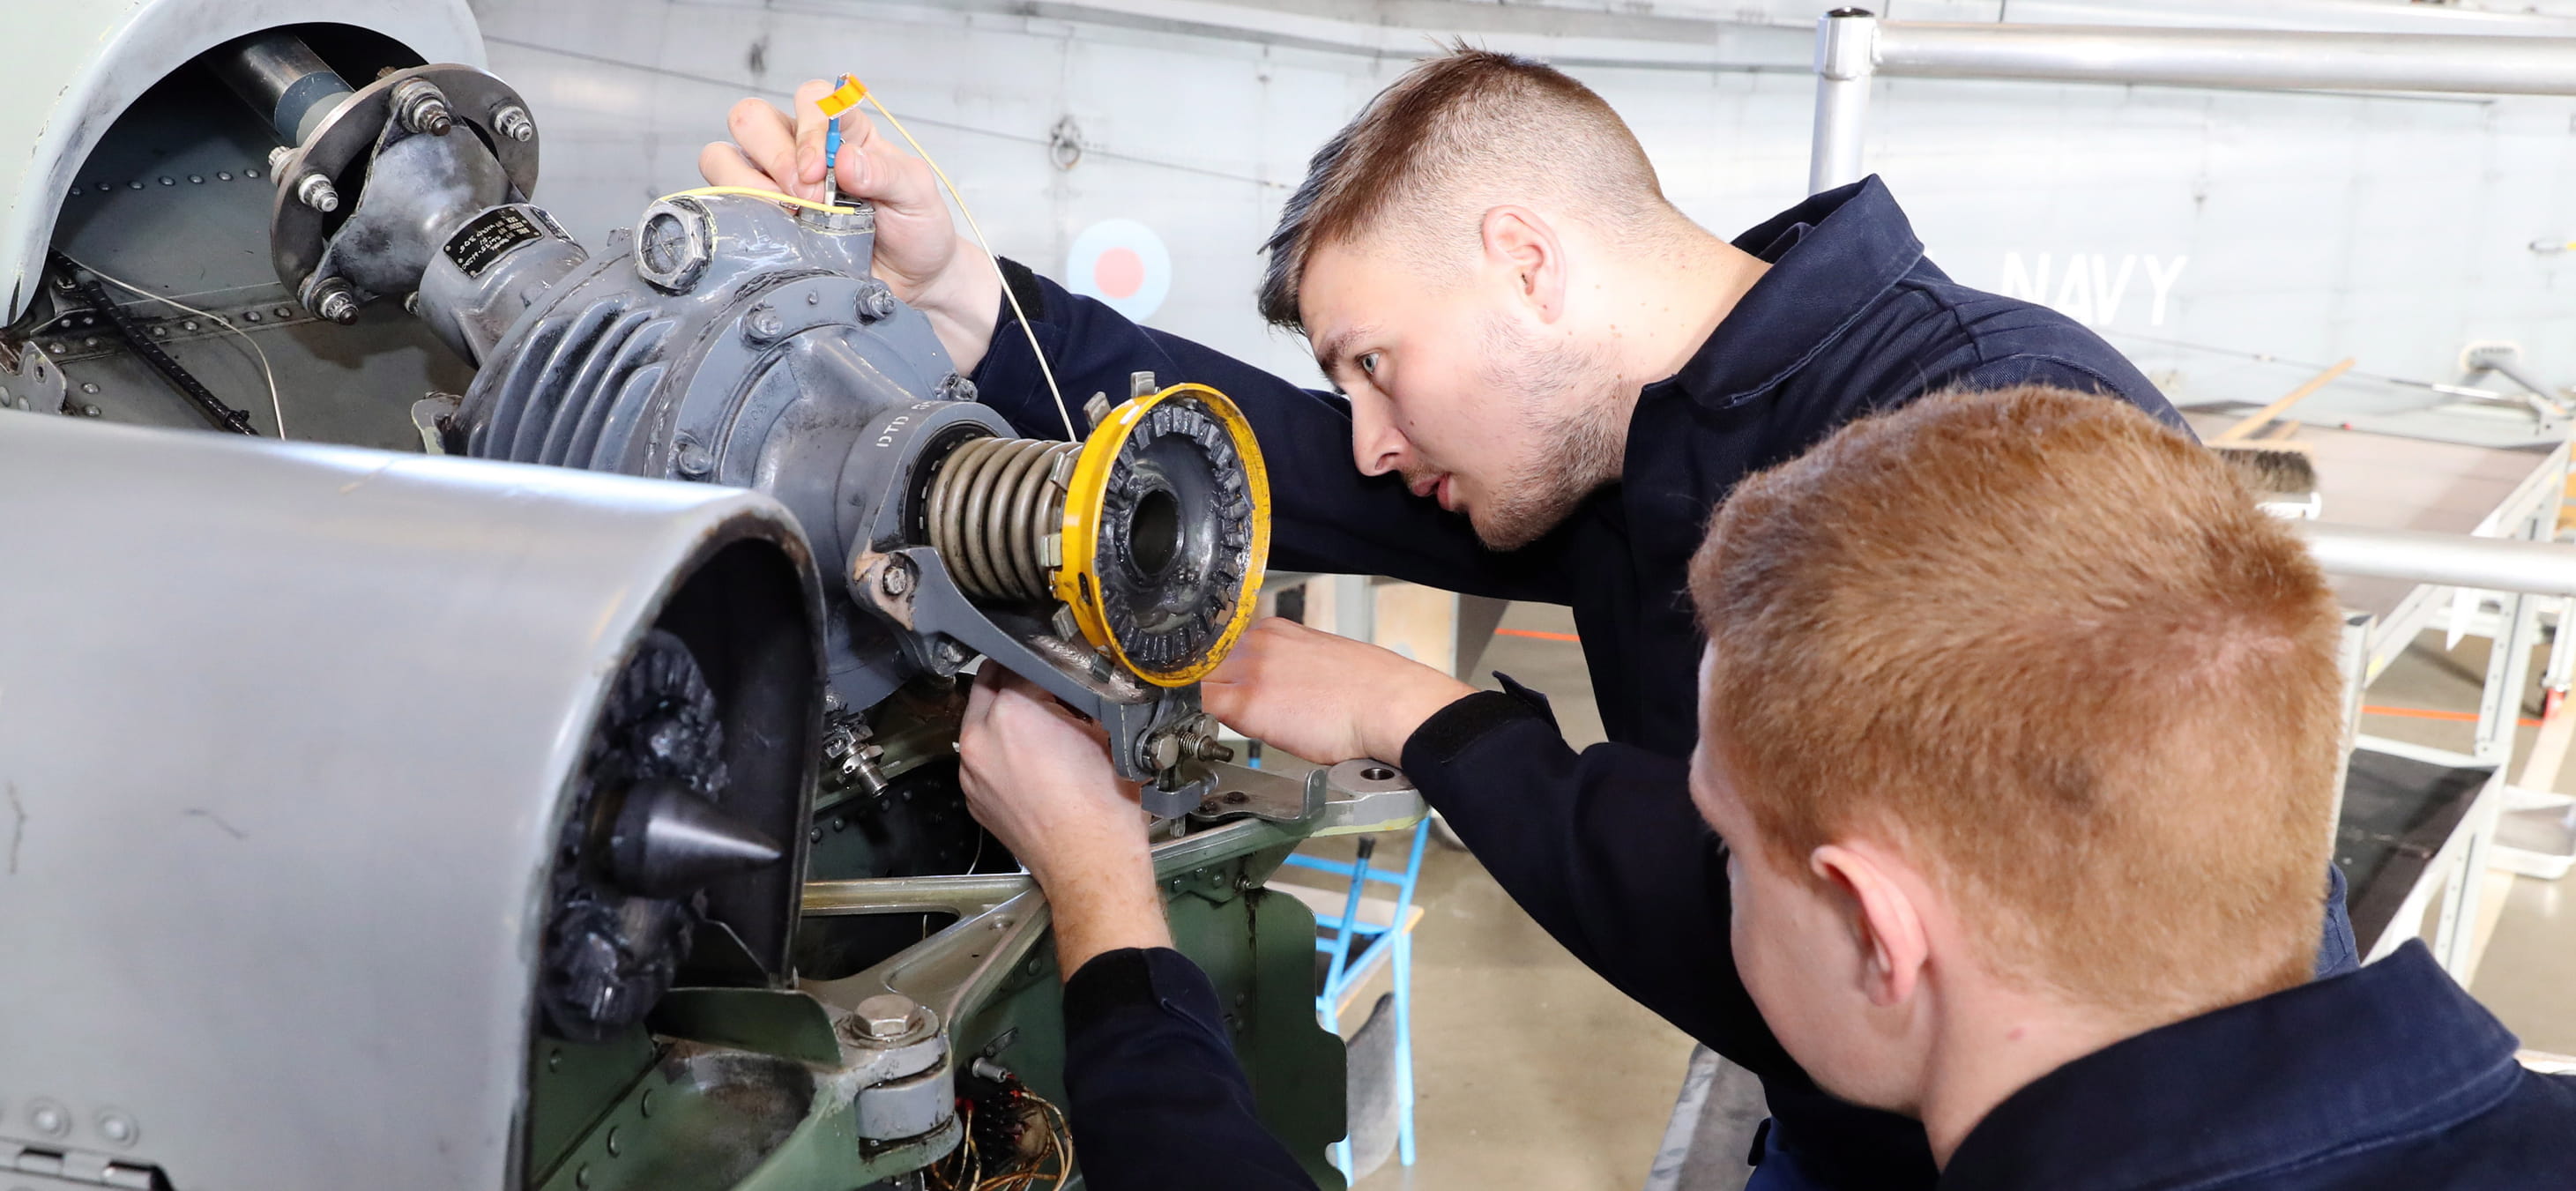 Air Engineer Technicians undertaking training in 764 SQNPHASE 2 AET's undertaking hands on training on Sea king aircraft